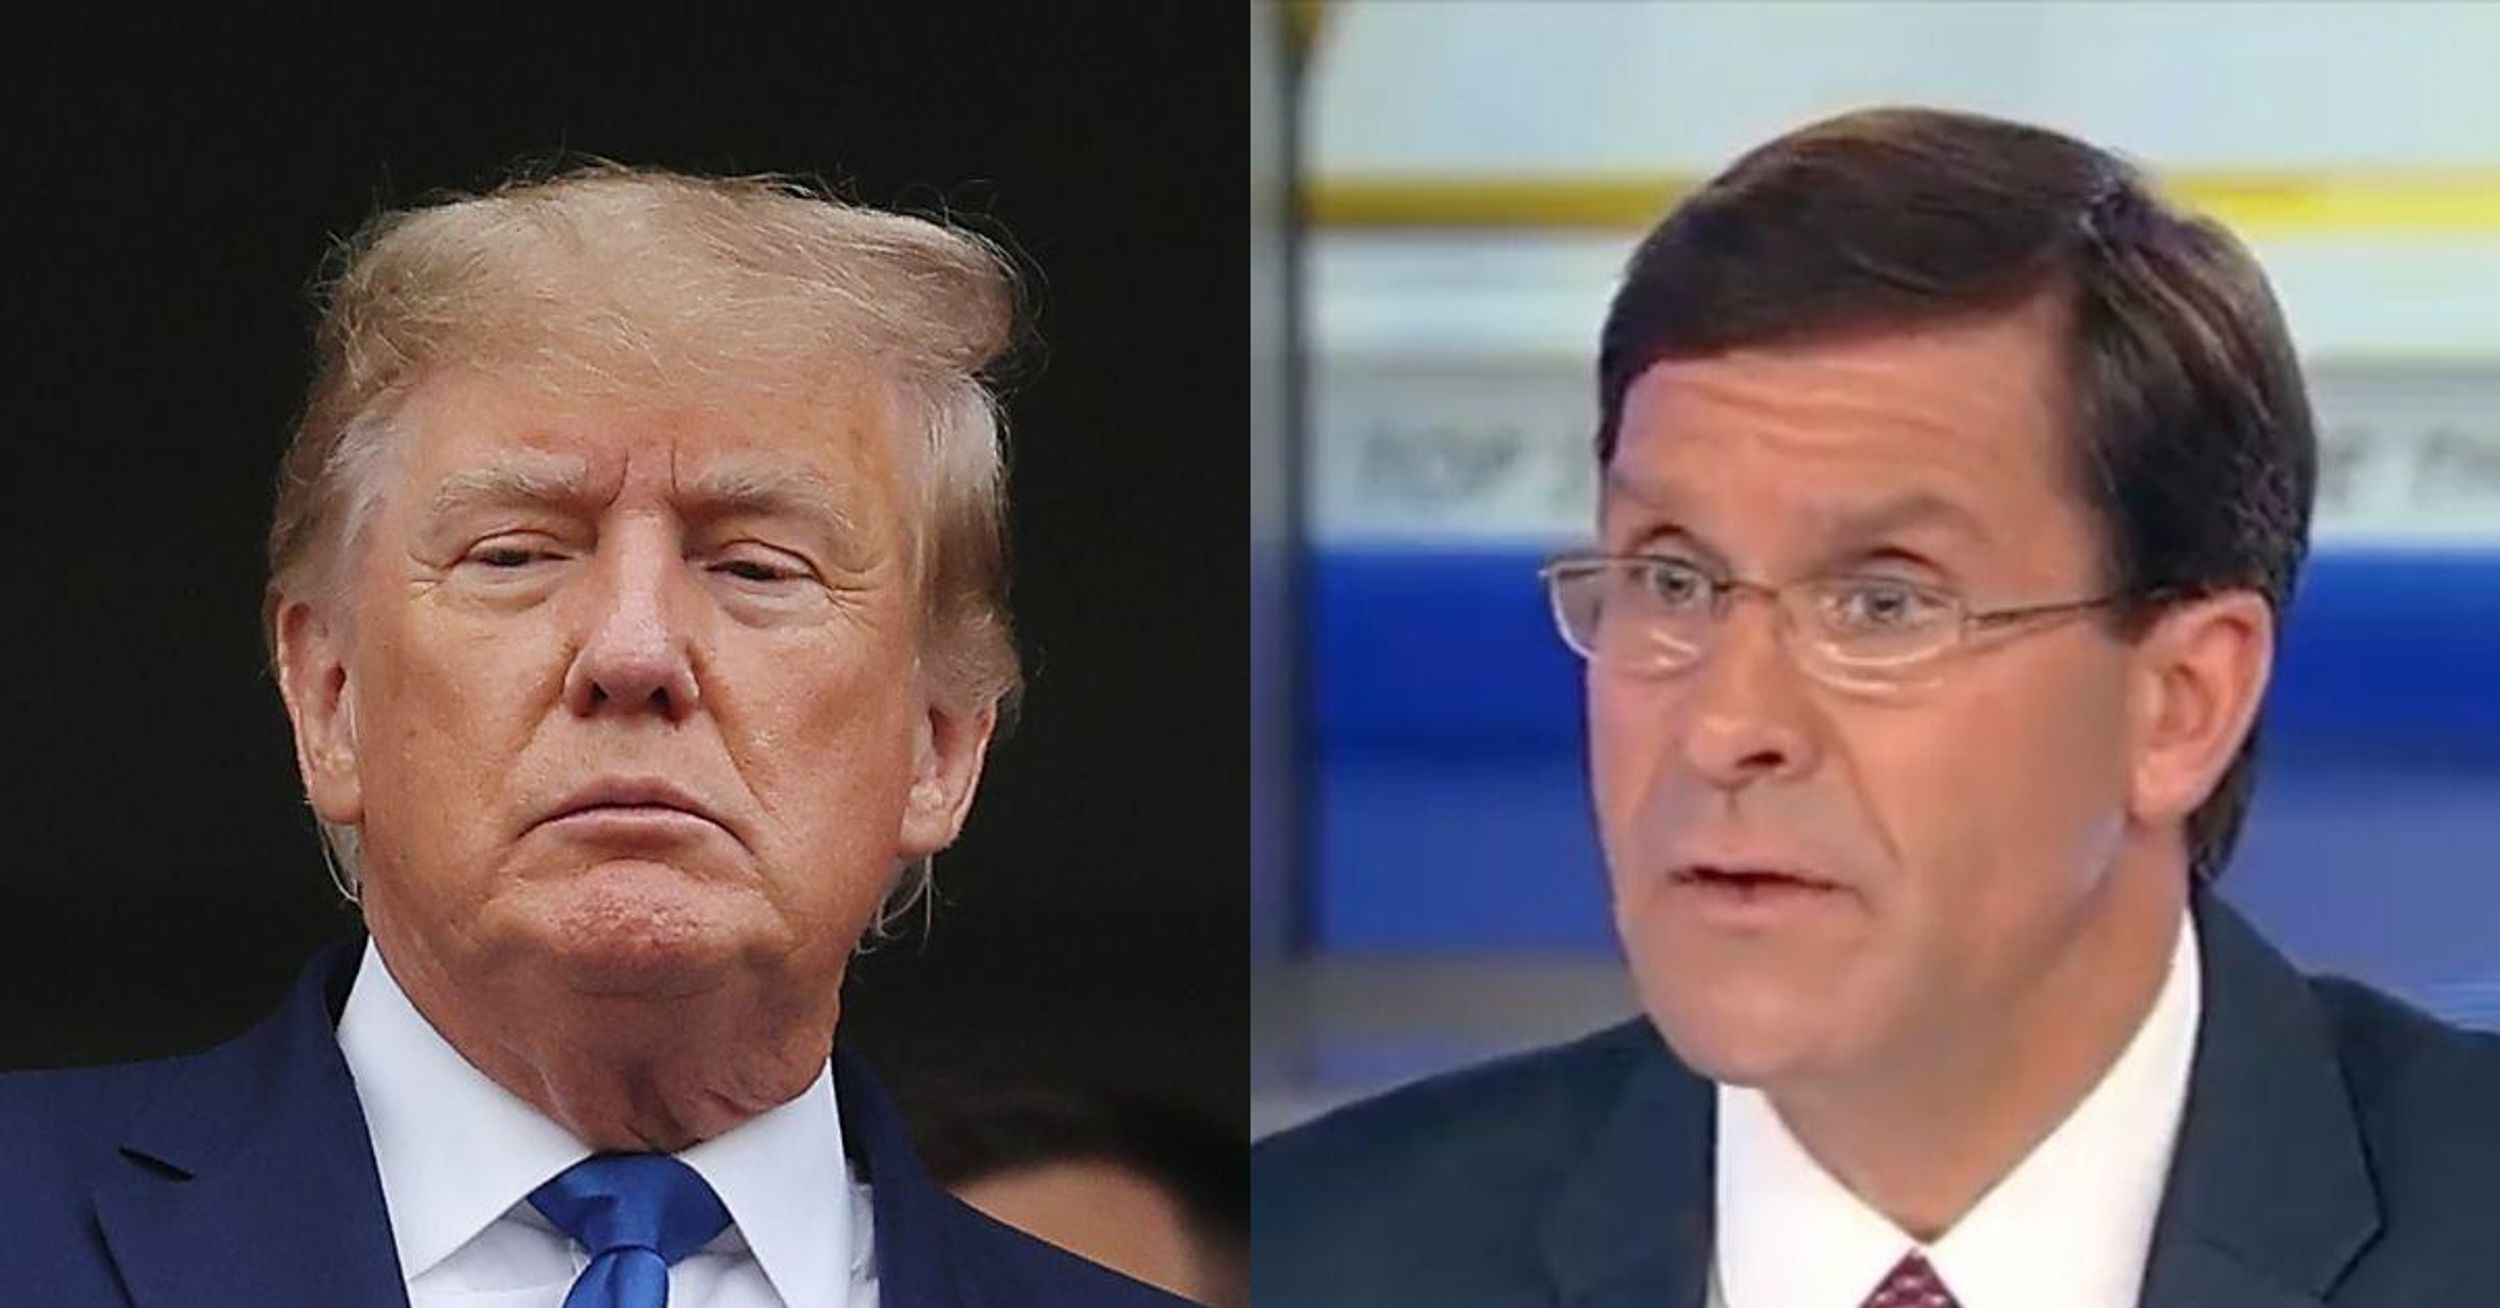 Trump's Former Defense Sec Admits Trump Is 'A Threat To Our Democracy' In Blunt Fox News Interview